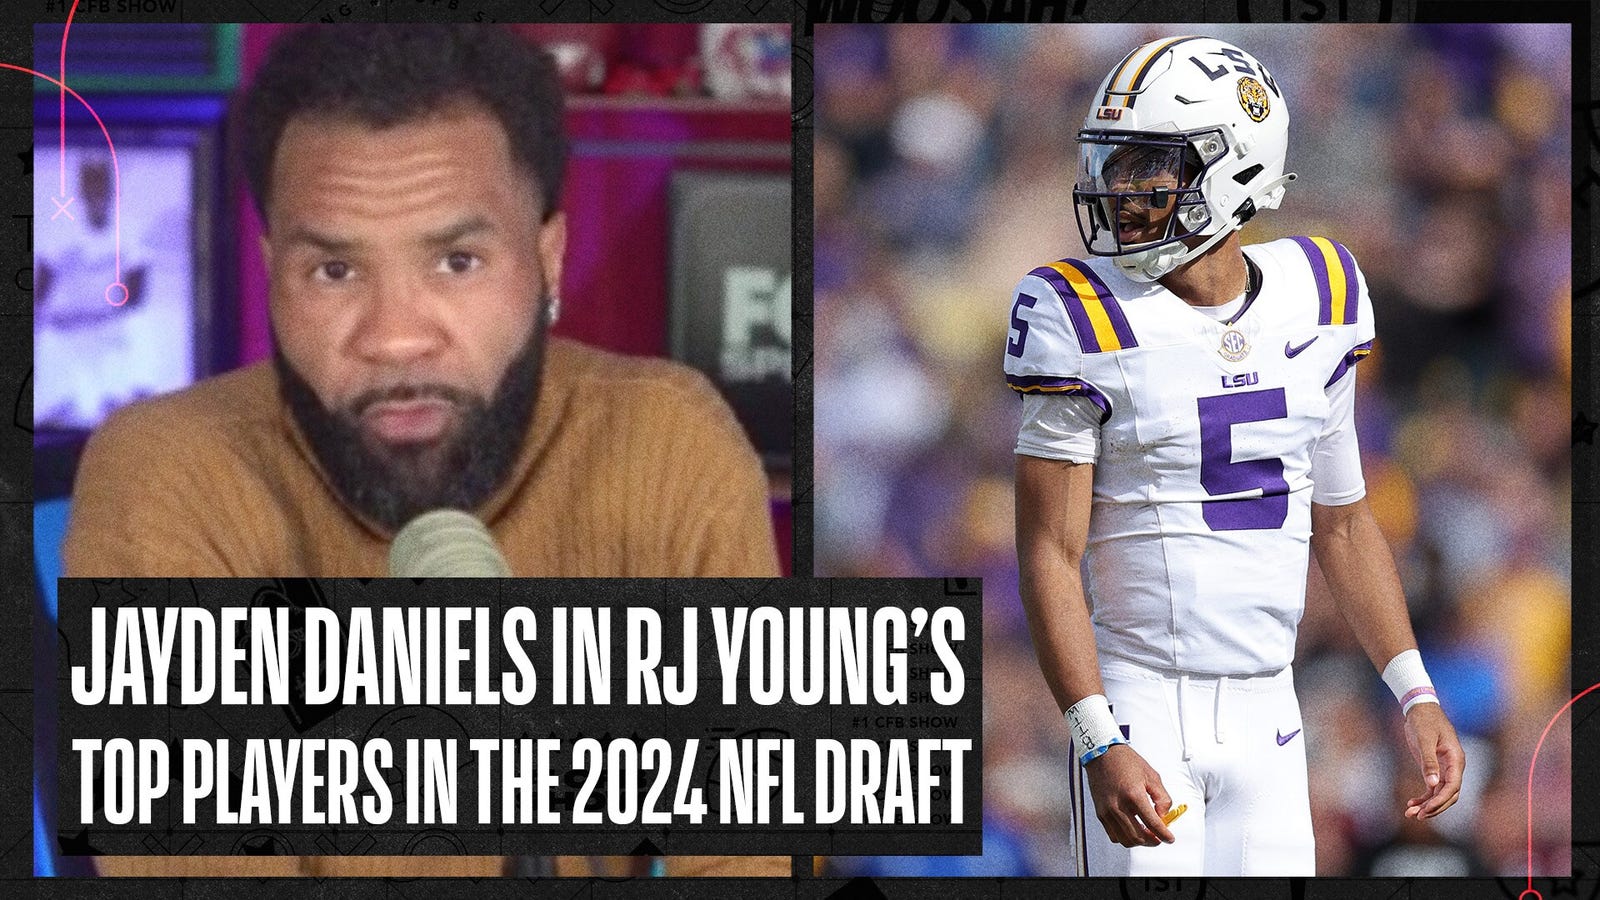 Rome Odunze among RJ Young's top 6-10 players in 2024 NFL Draft